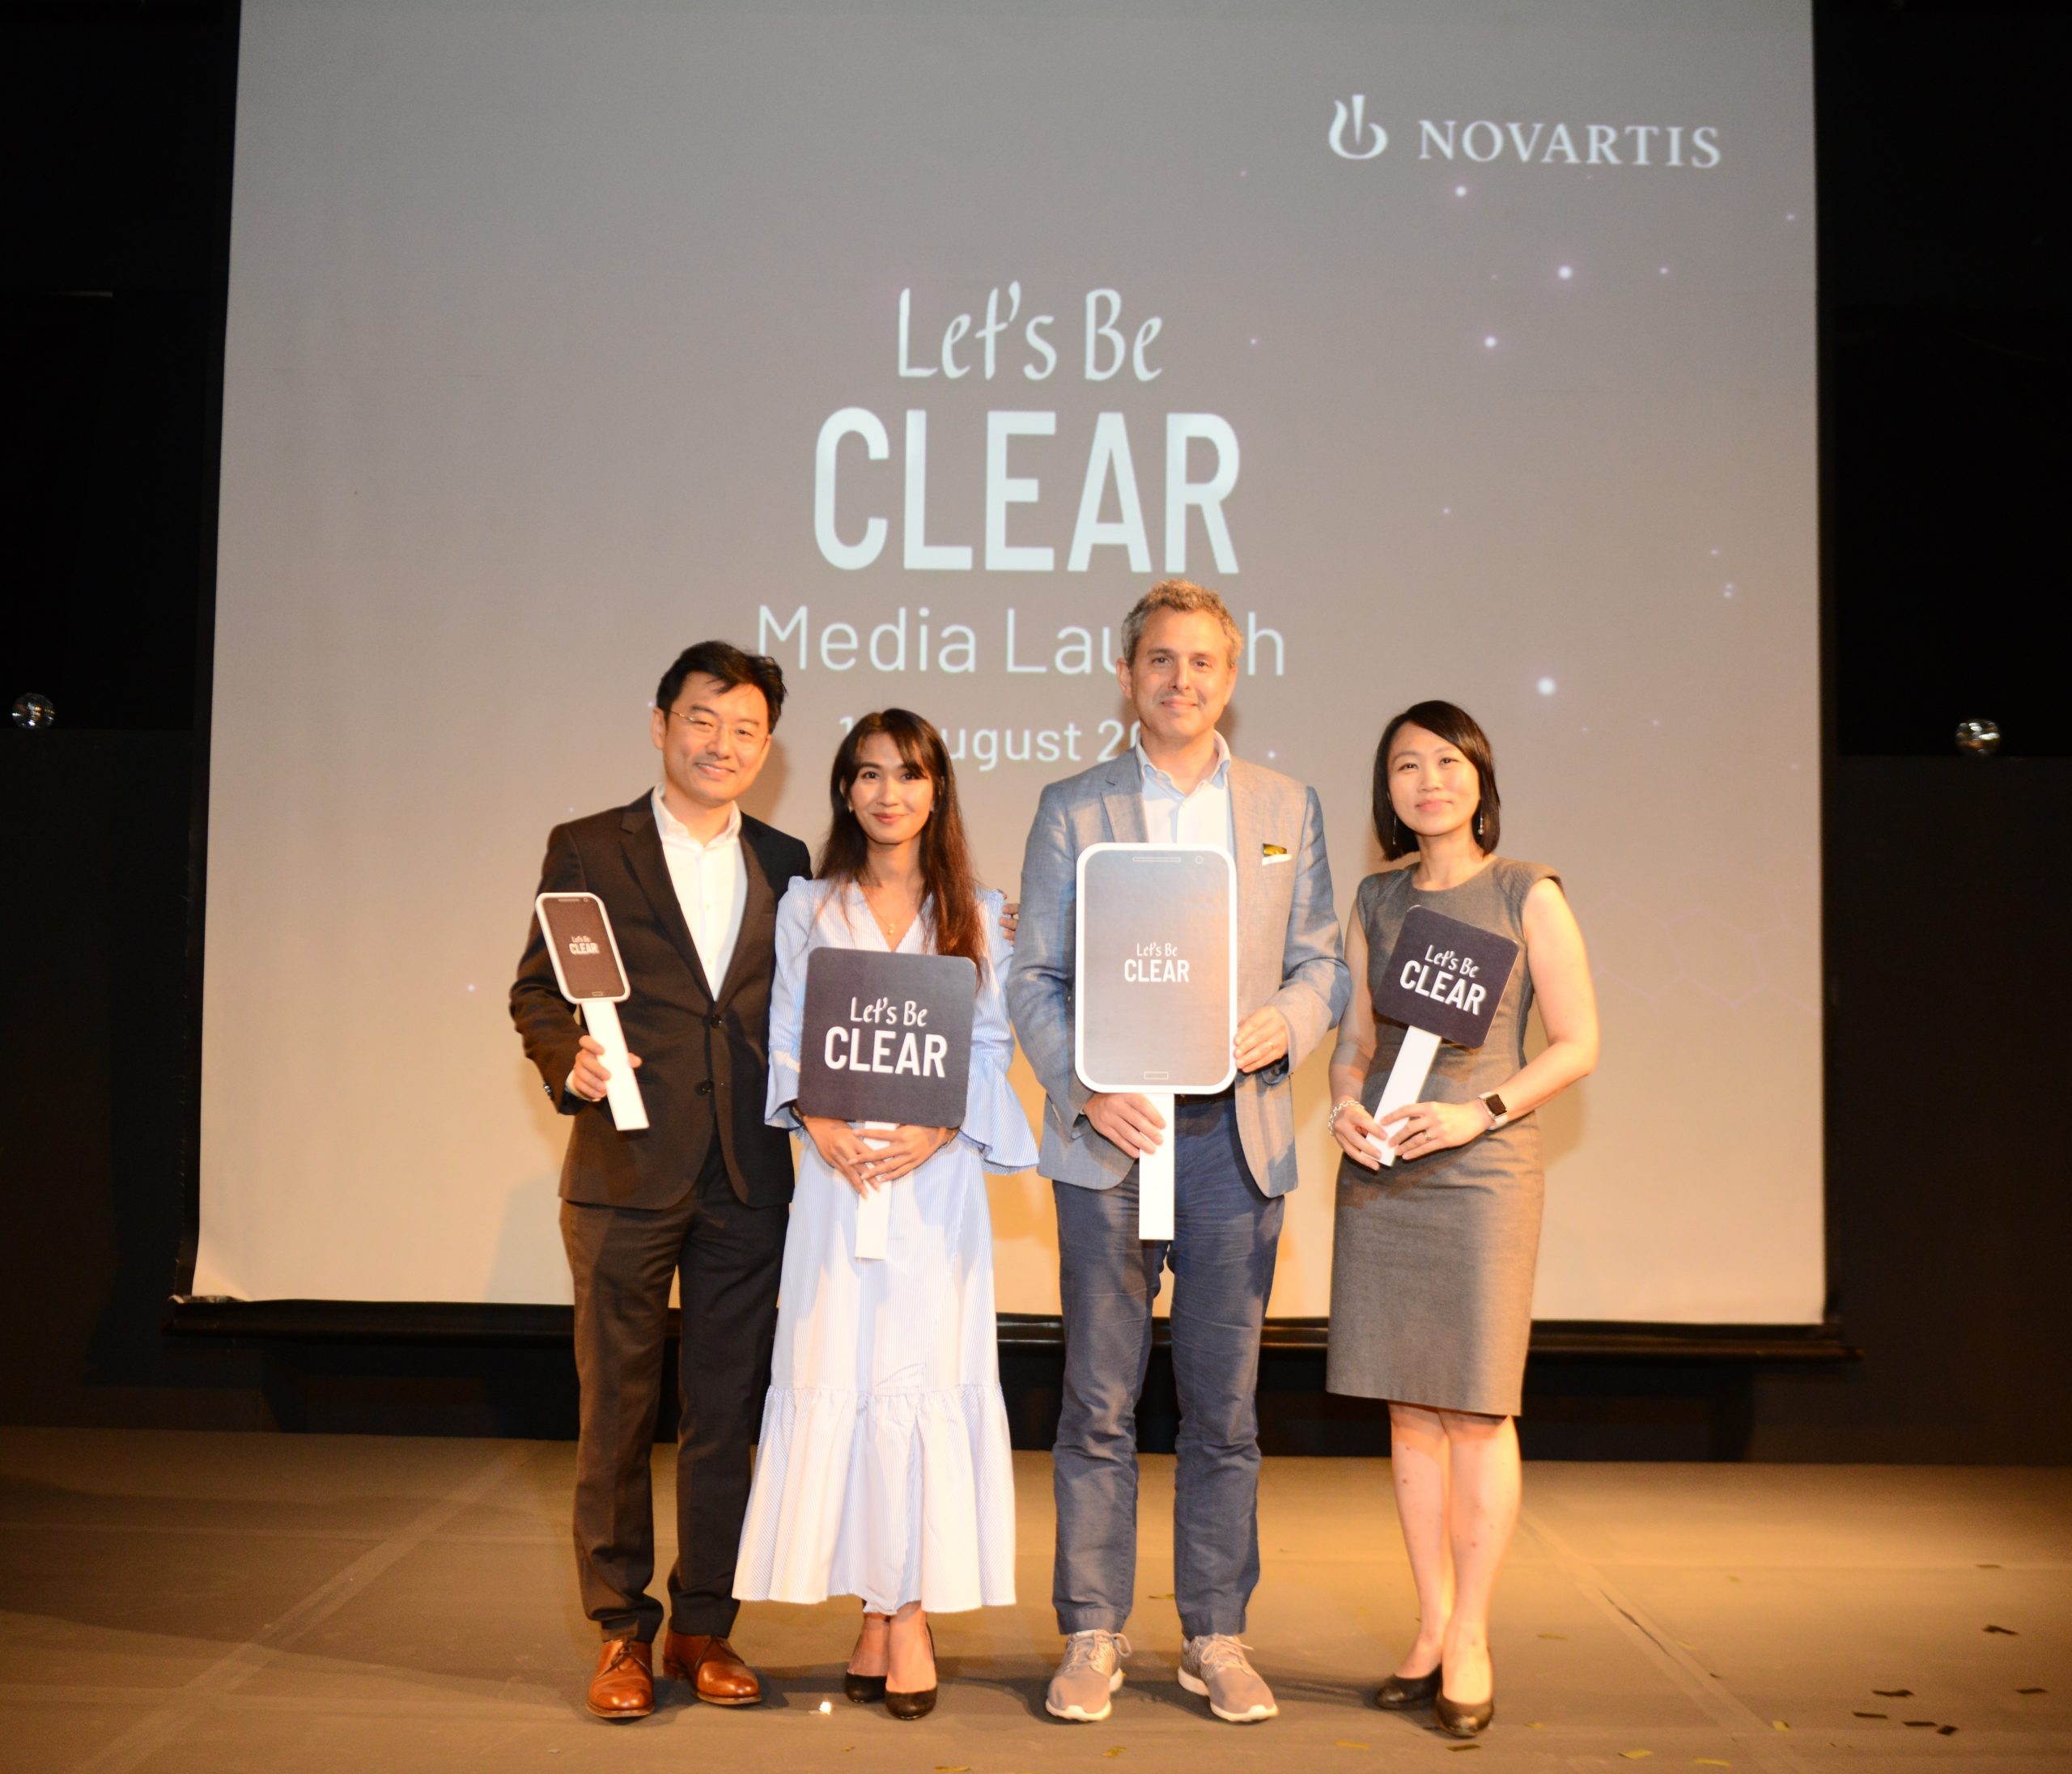 Novartis launches Let’s Be Clear, a new mobile health app for psoriasis, psoriatic arthritis and ankylosing spondylitis patients